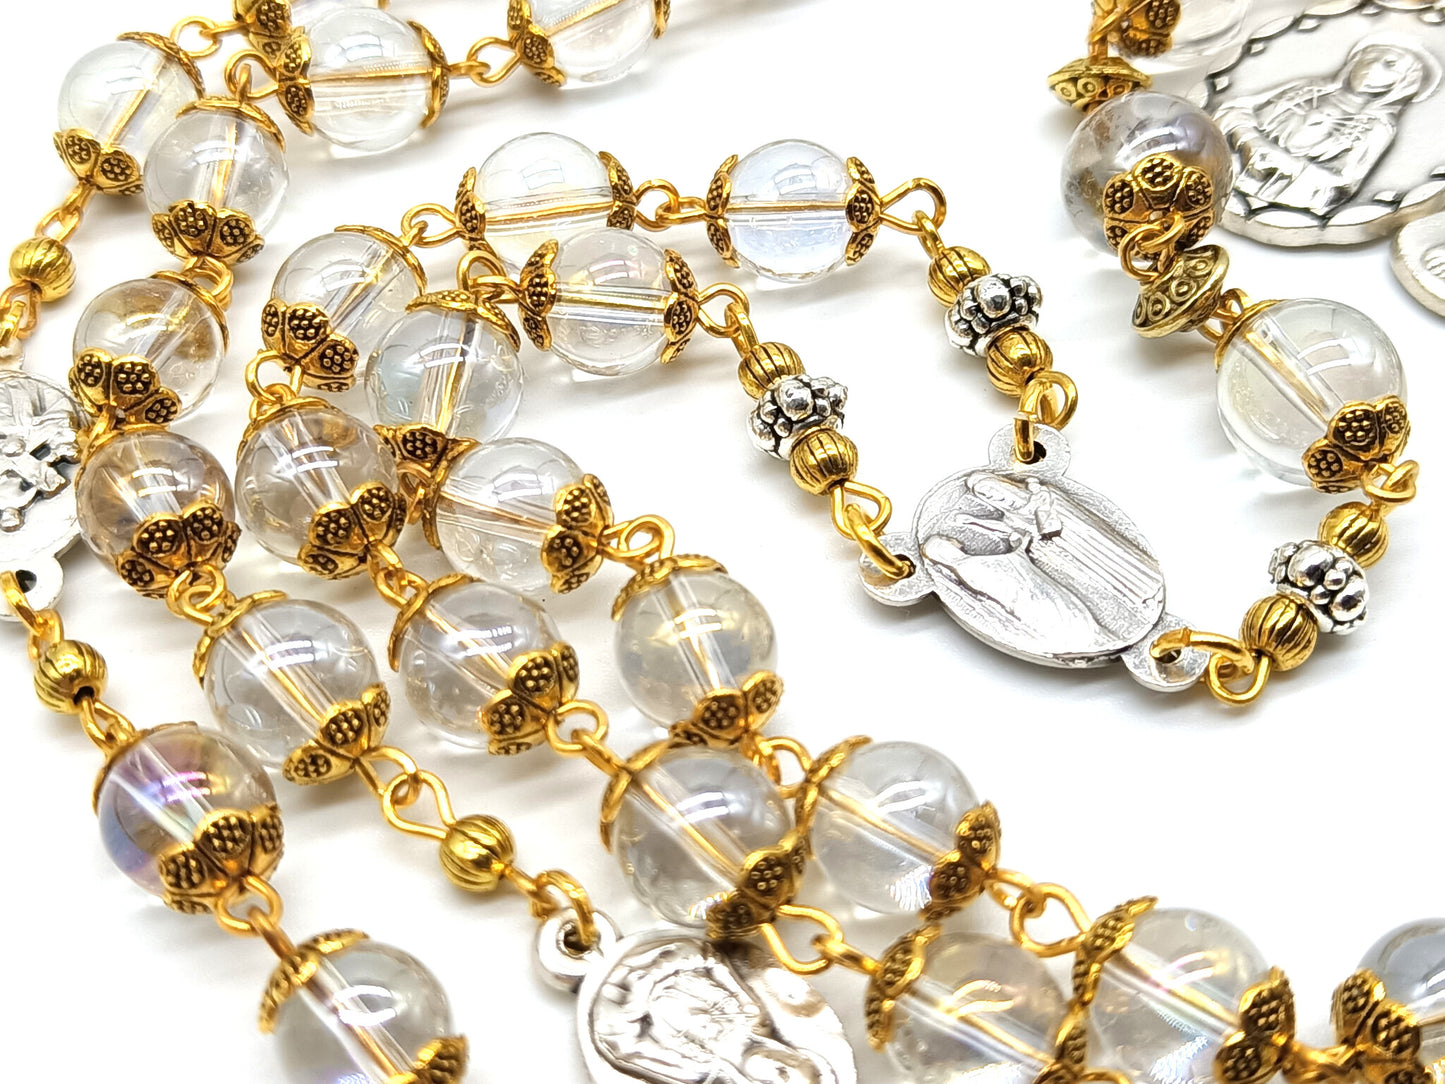 Glass and gold unique dolor rosary beads with silver dolour medals, crucifix and gold bead caps.